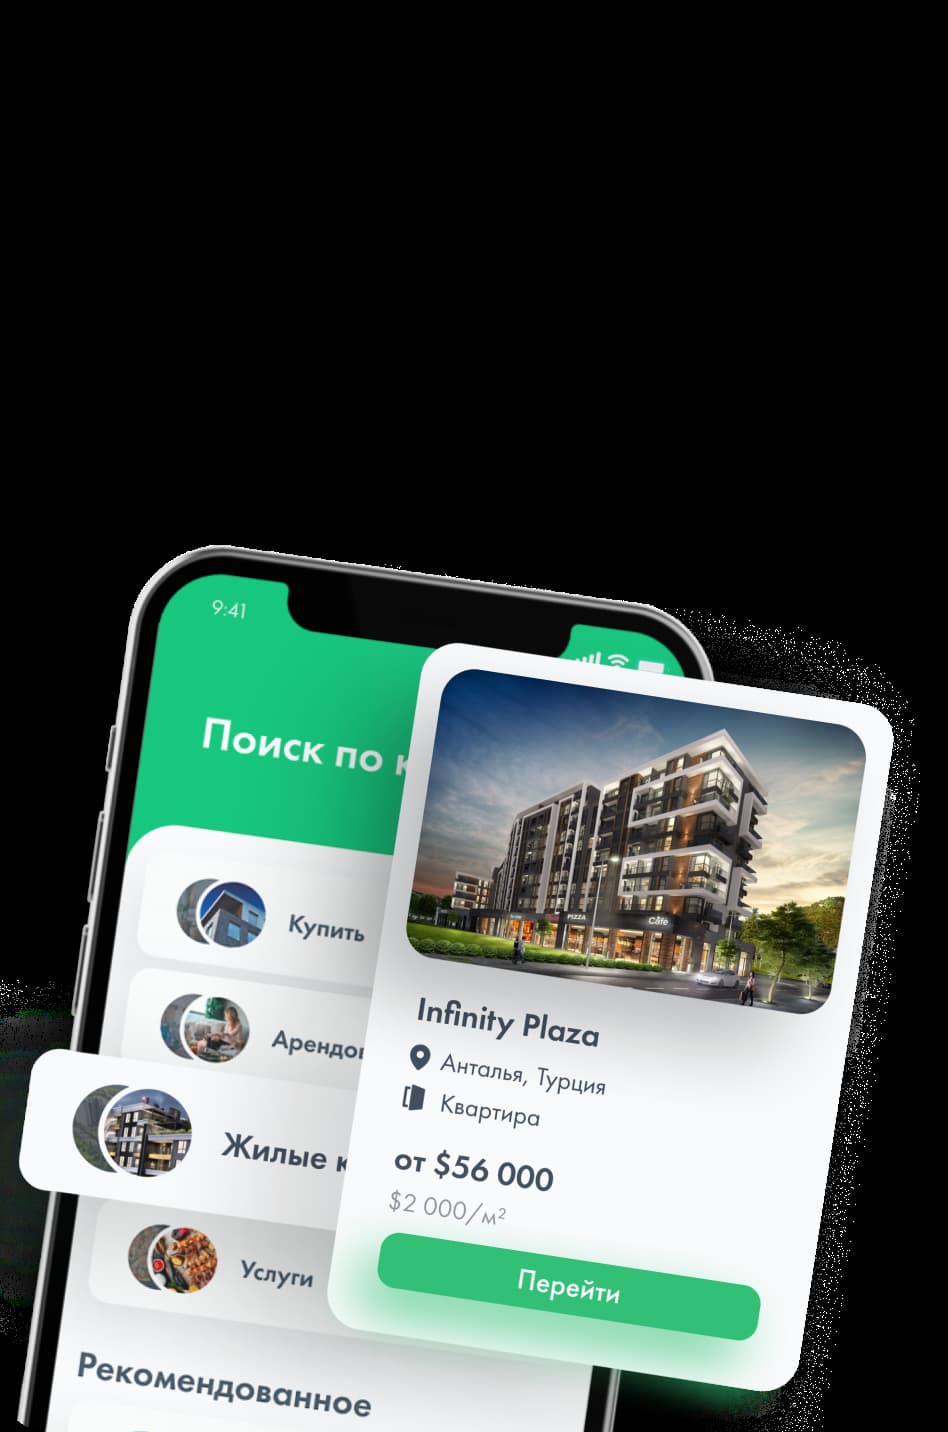 Development of a mobile application and website with an admin panel for a real estate marketplace with the ability to publish listings in Kazakhstan. Design, backend, frontend using Node.js, Nest.js, Dart, Flutter & Flutter Web.